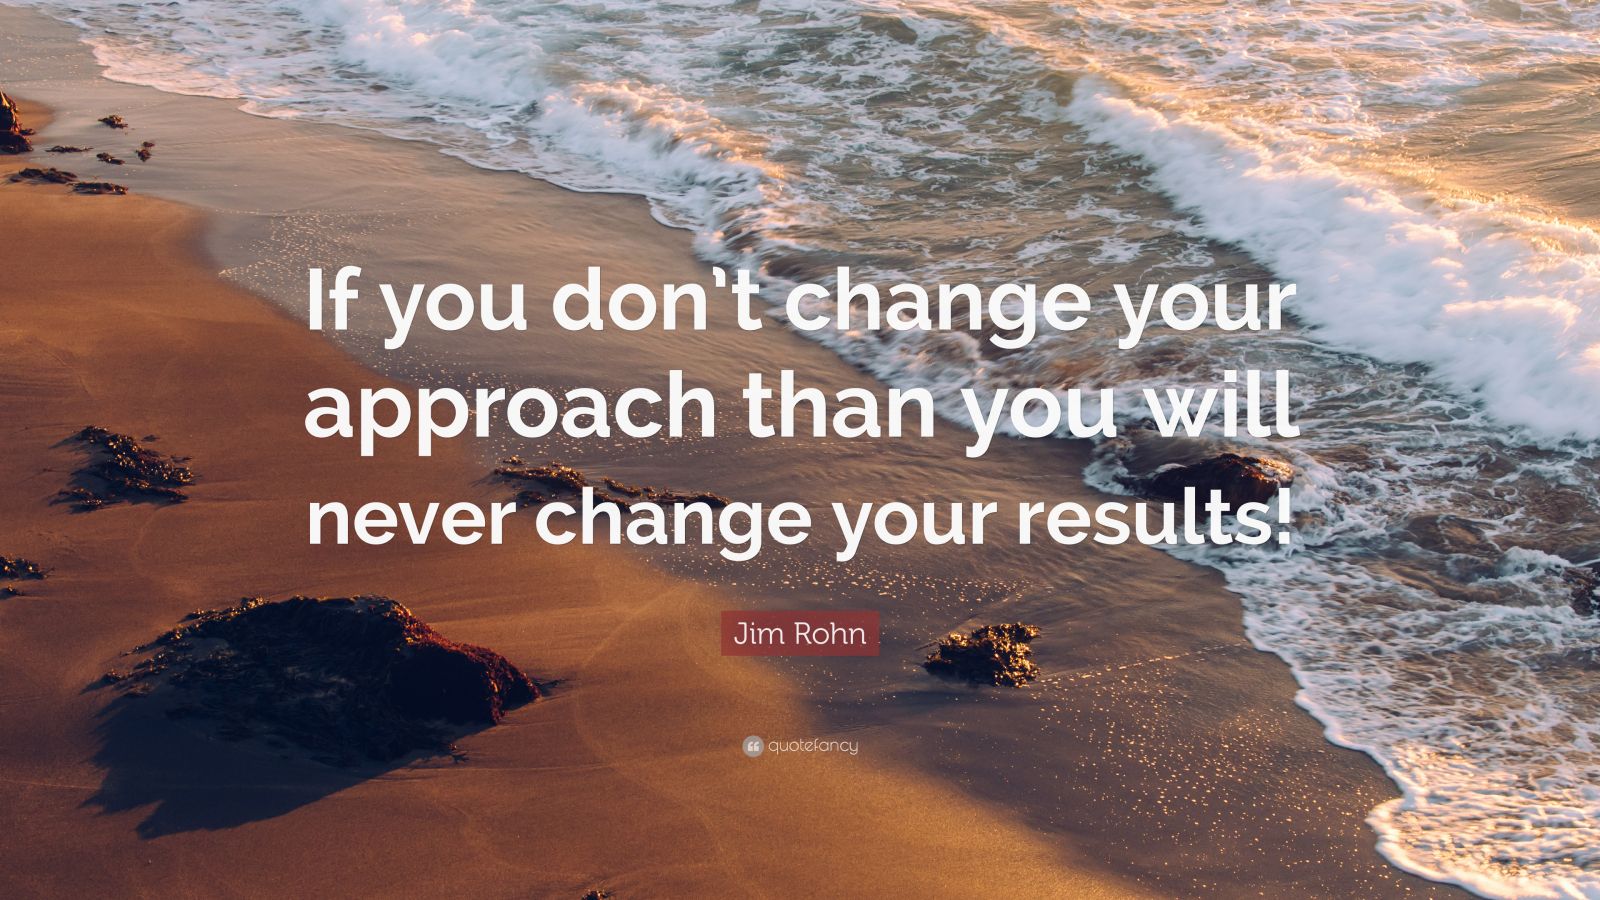 Jim Rohn Quote: “If you don’t change your approach than you will never ...